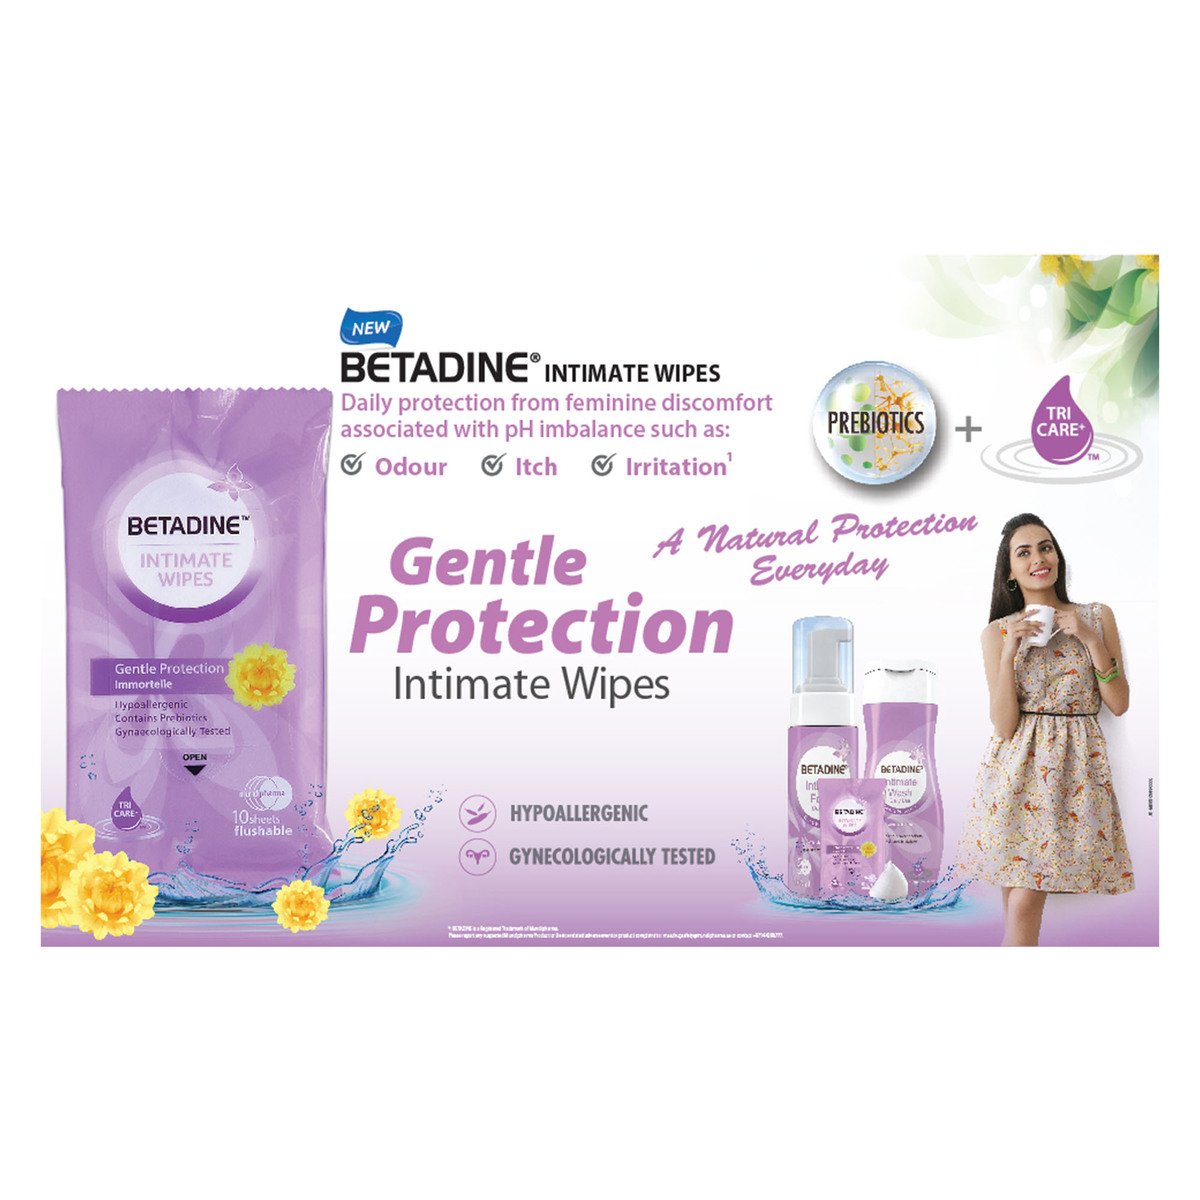 Betadine Gentle Protection Immortelle Intimate Wipes 10 sheets